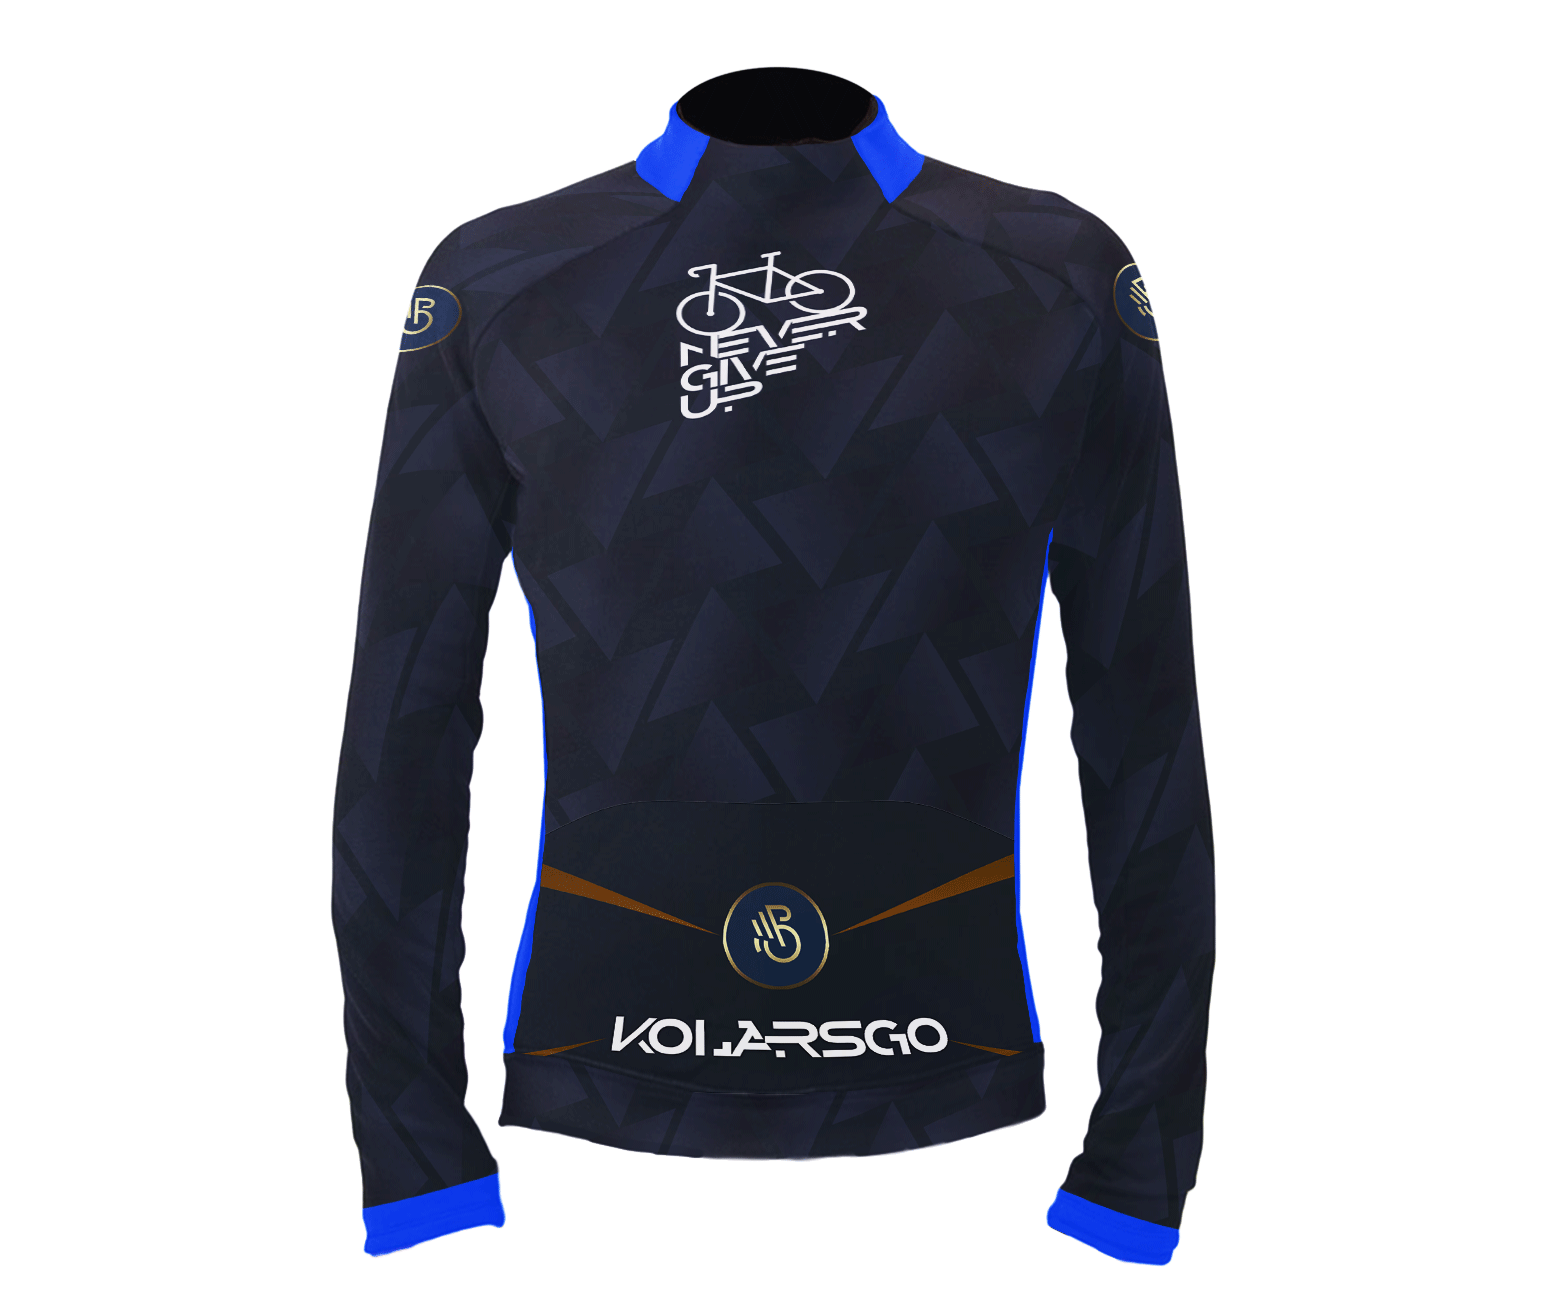 Cycling windbreaker NEVER GIVE UP image 2